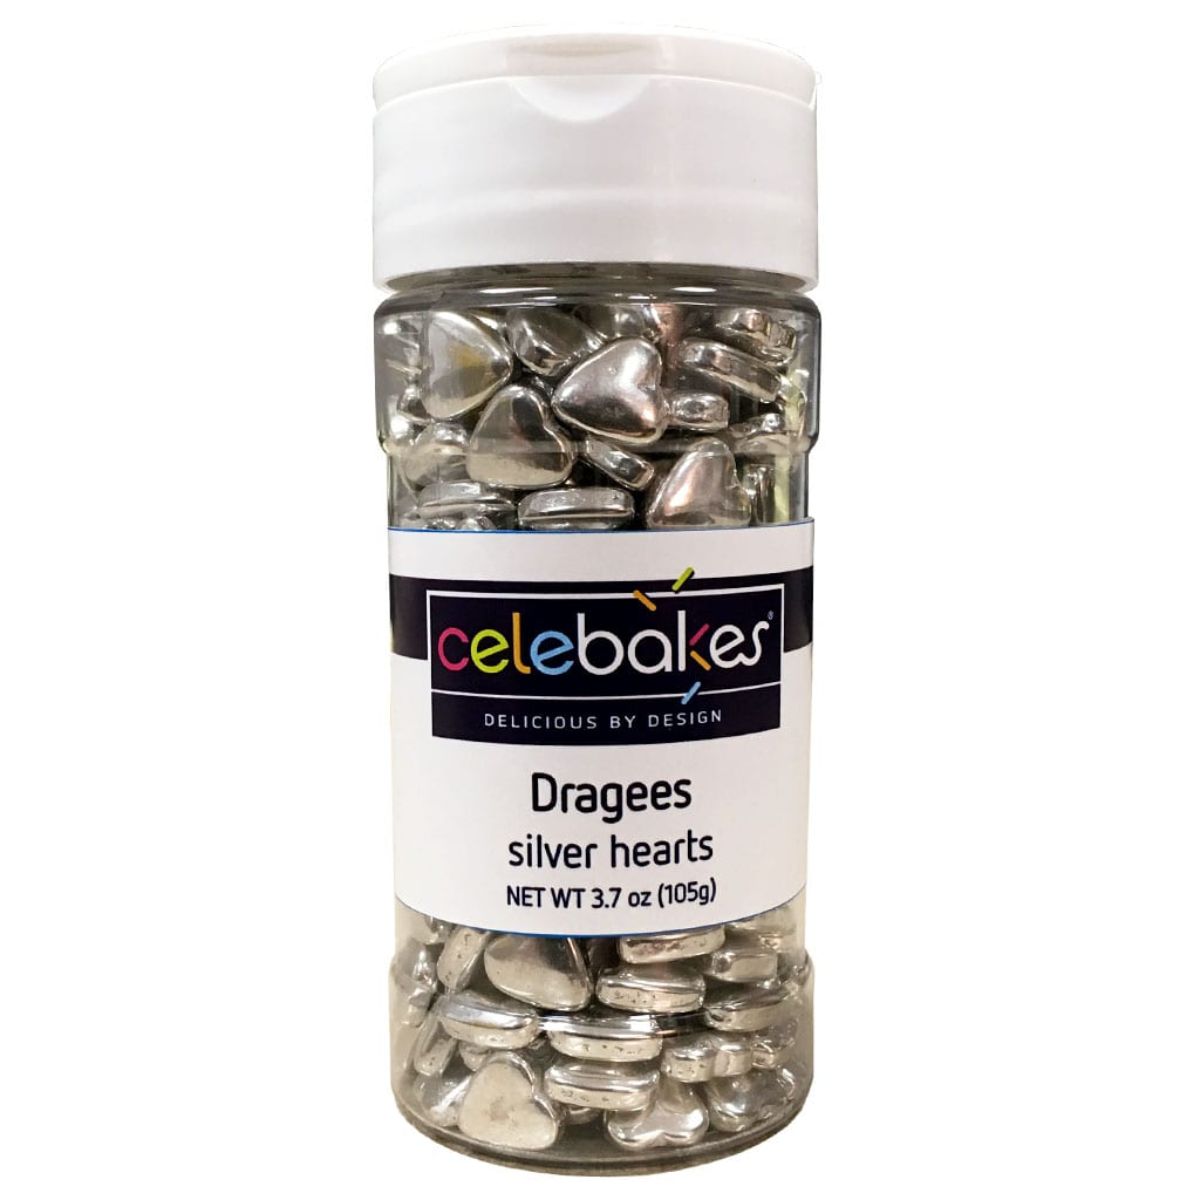 Dragees Silver Hearts 3.7oz